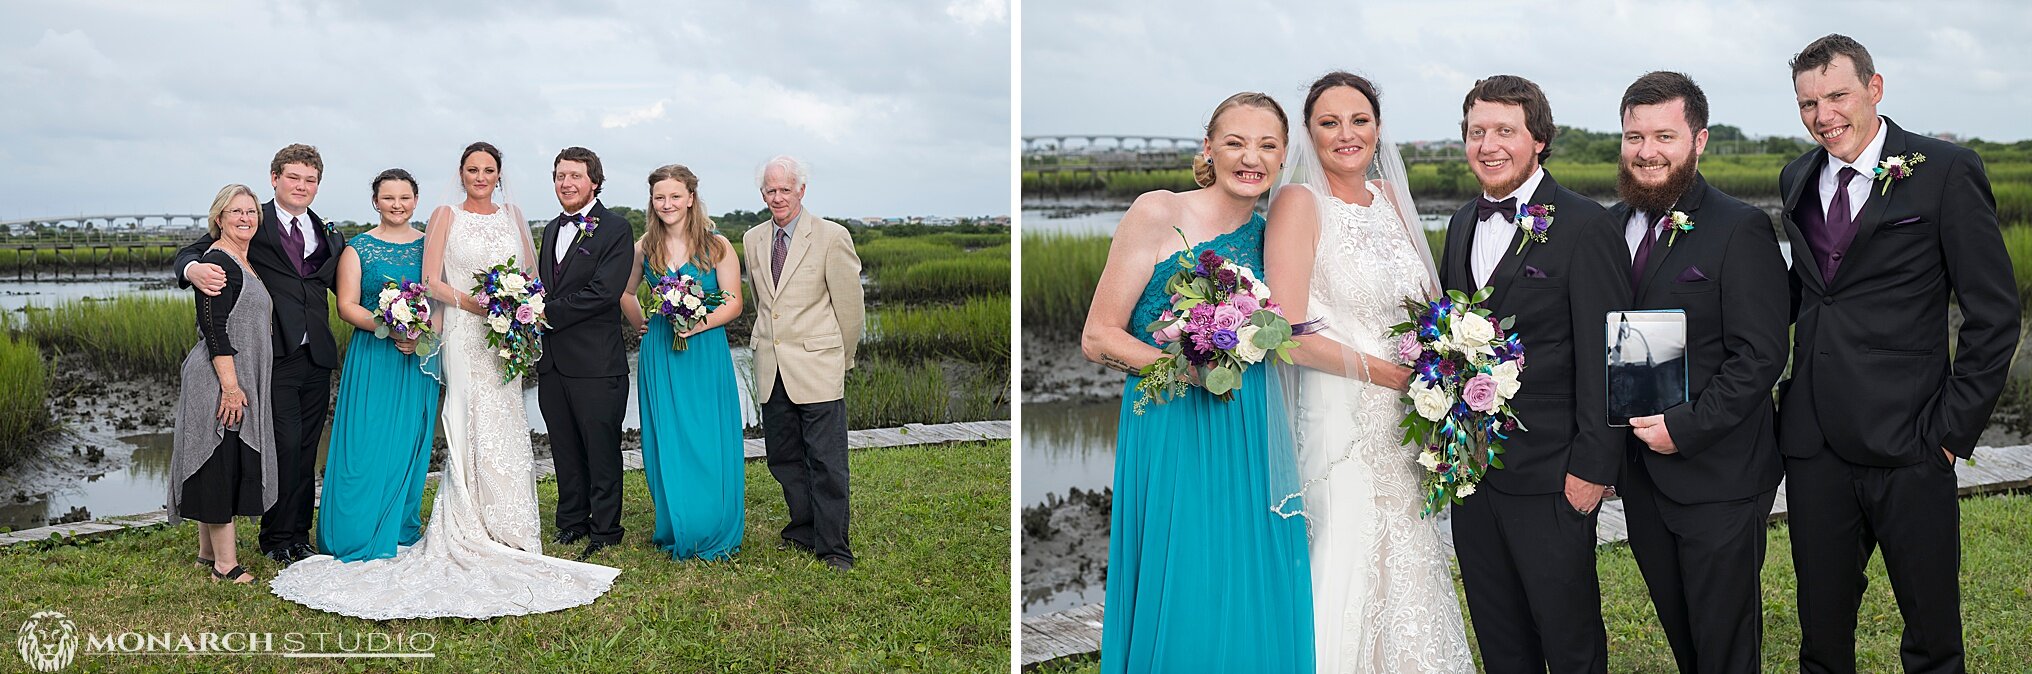 058-Affordable-Wedding-Photographer-in-st-augustine.jpg